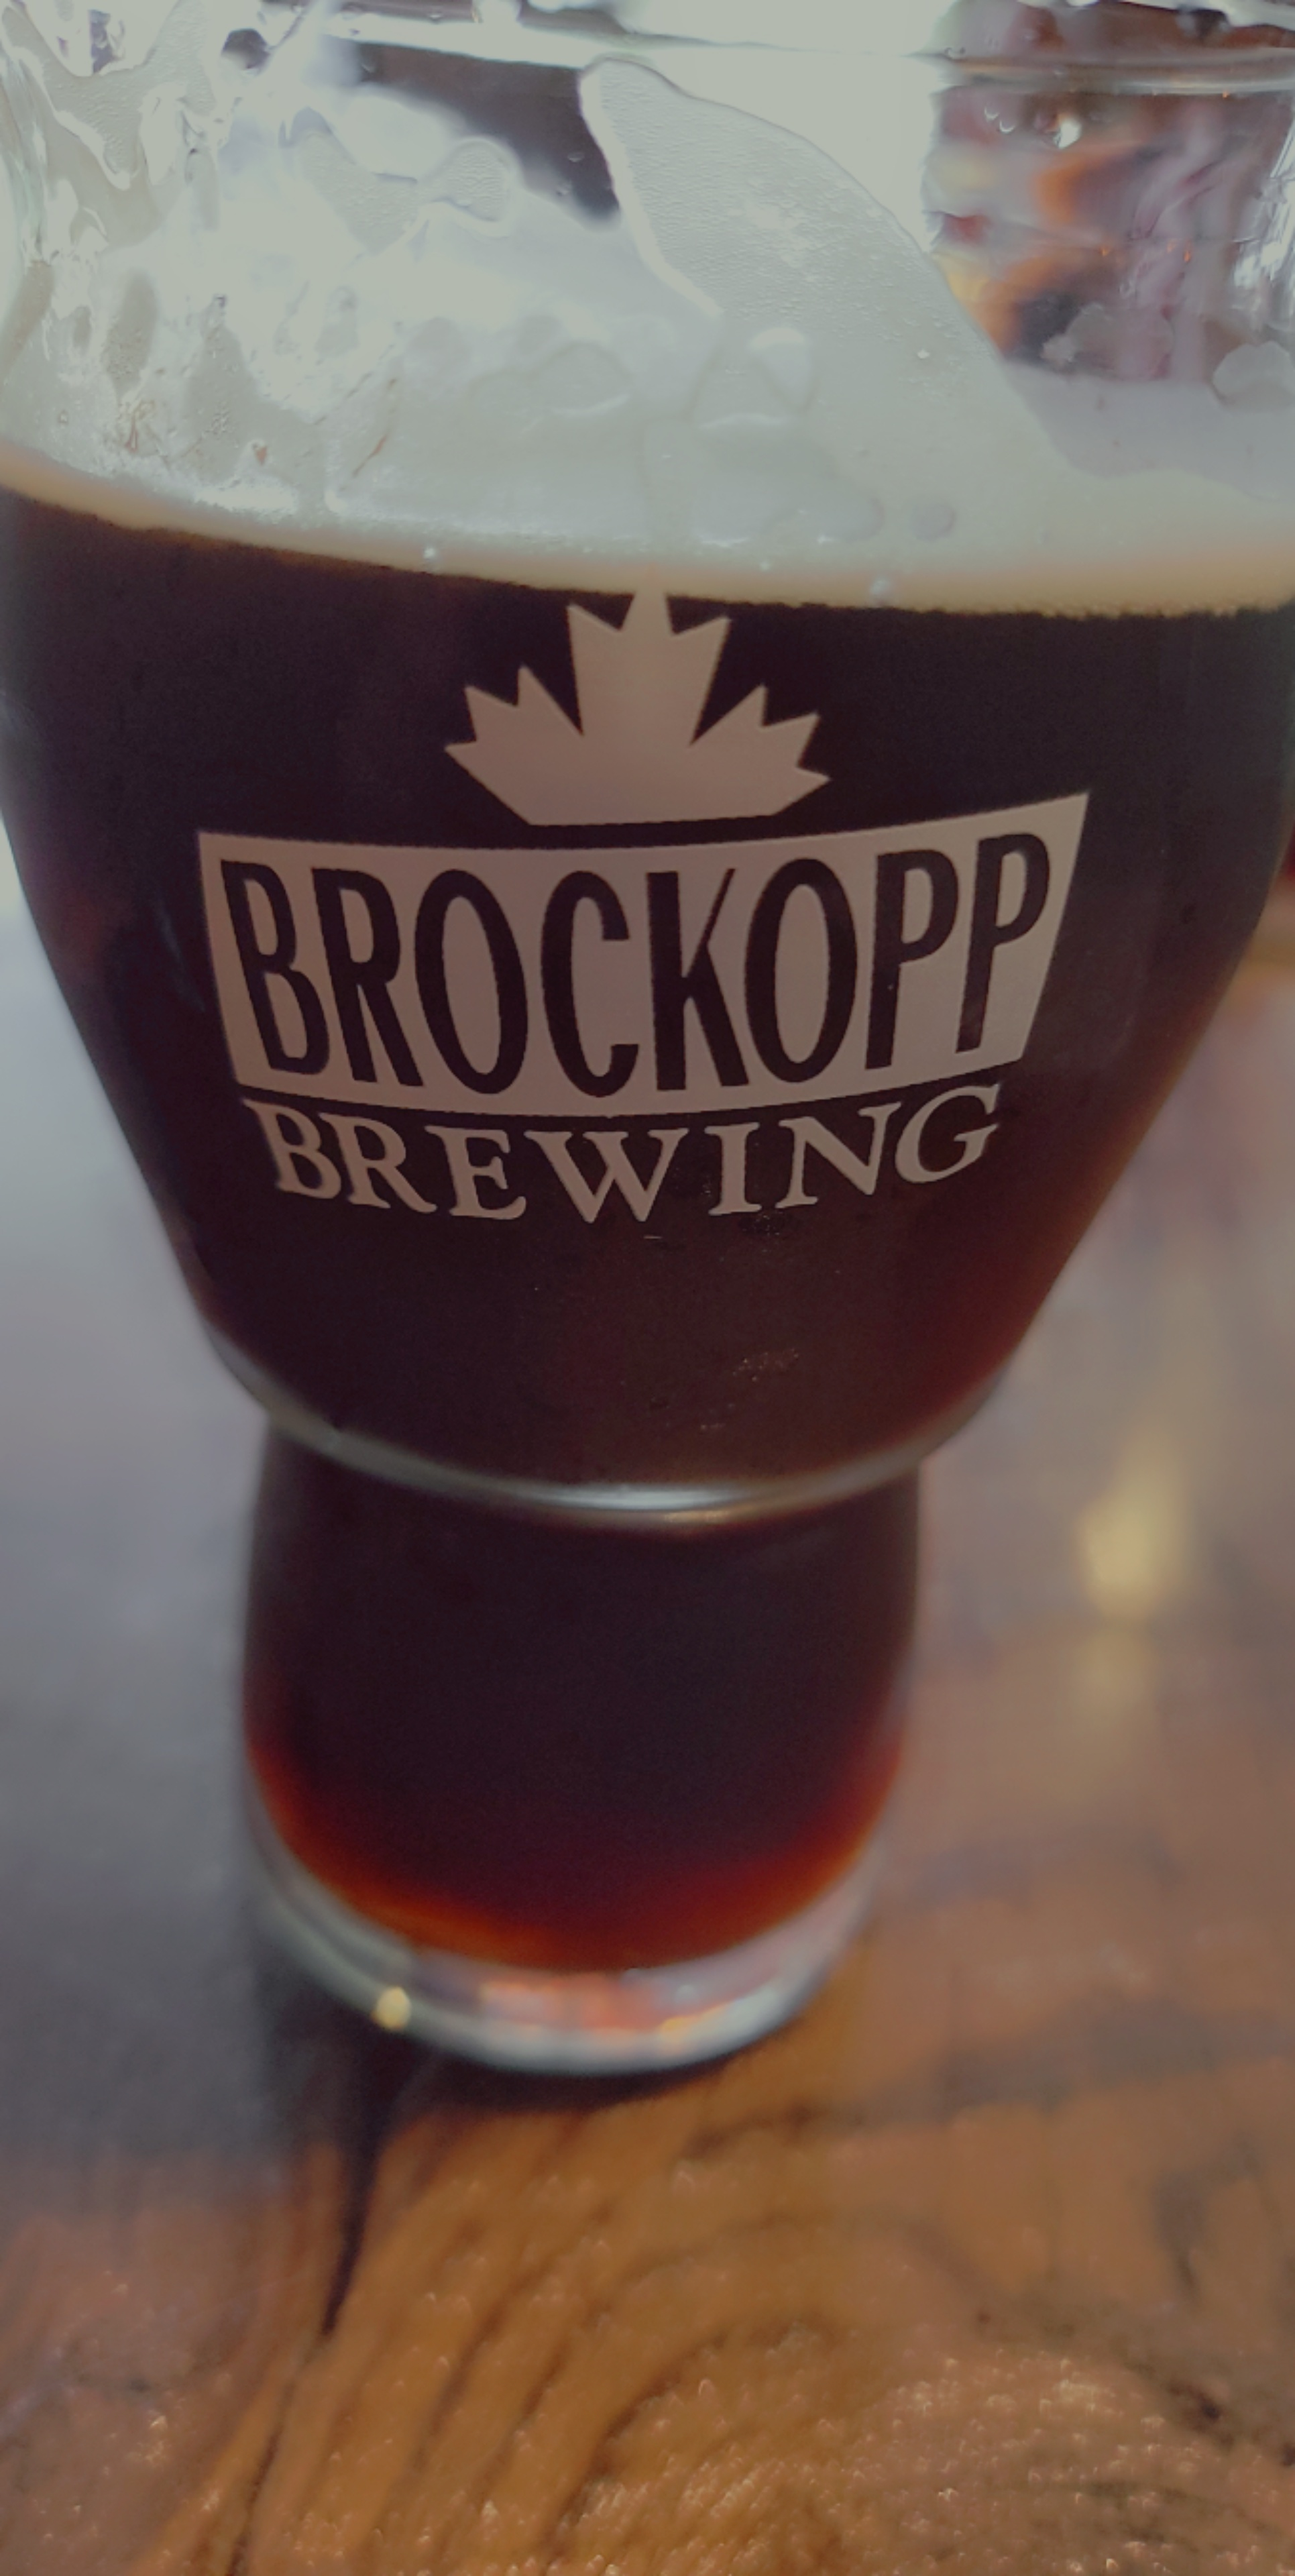 After Hours: Brockopp Brewing in Valley City